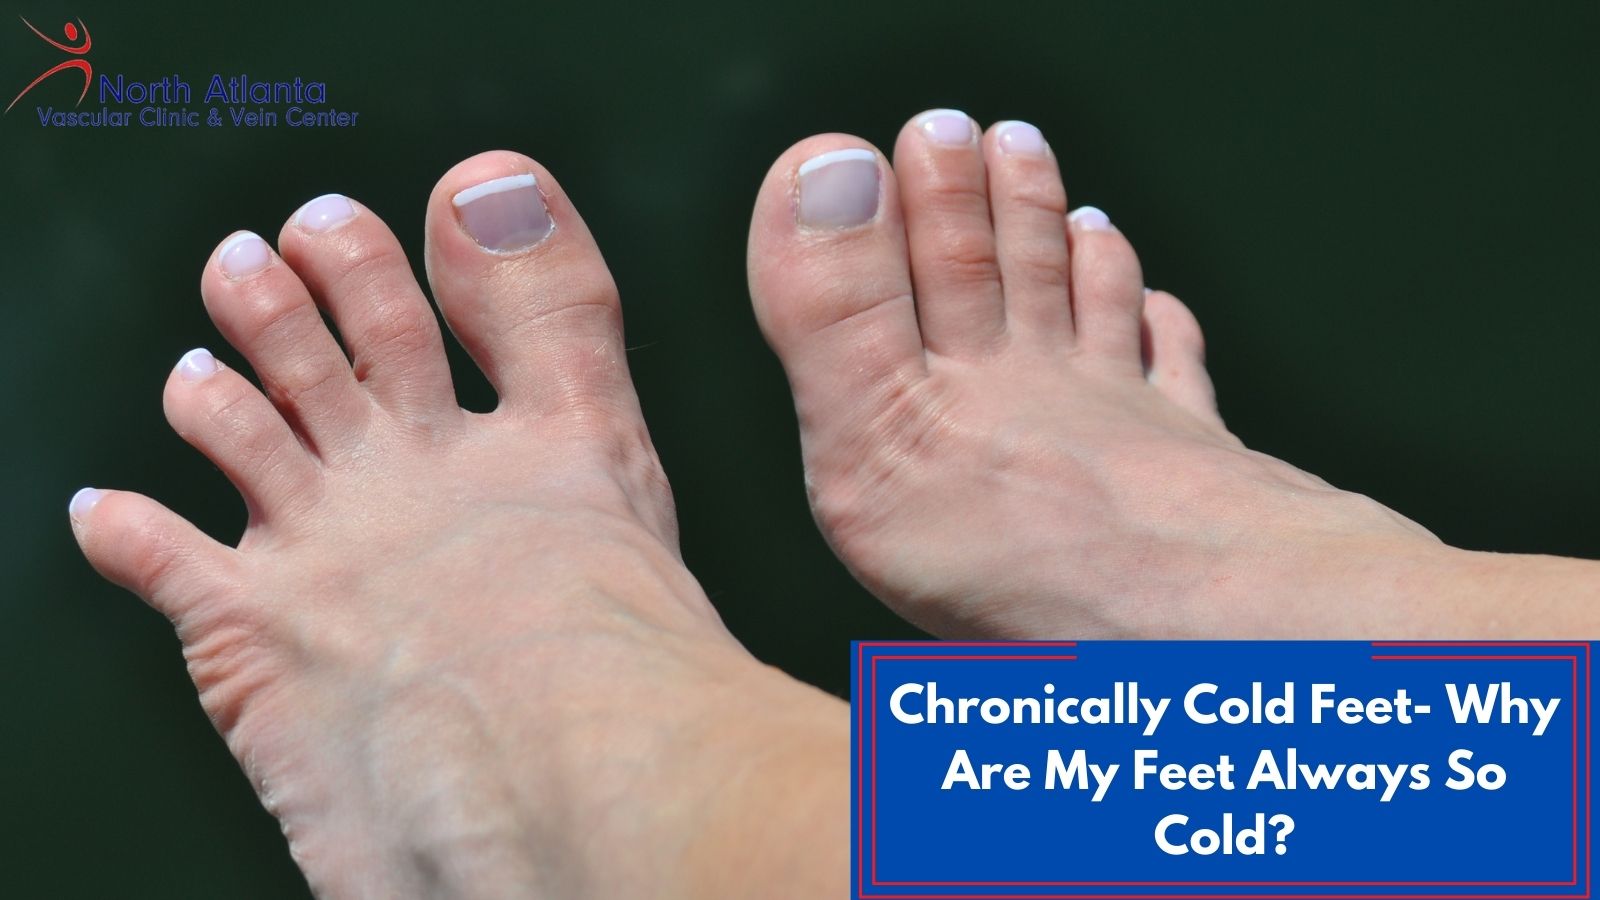 Chronically Cold Feet- Why Are My Feet Always So Cold?